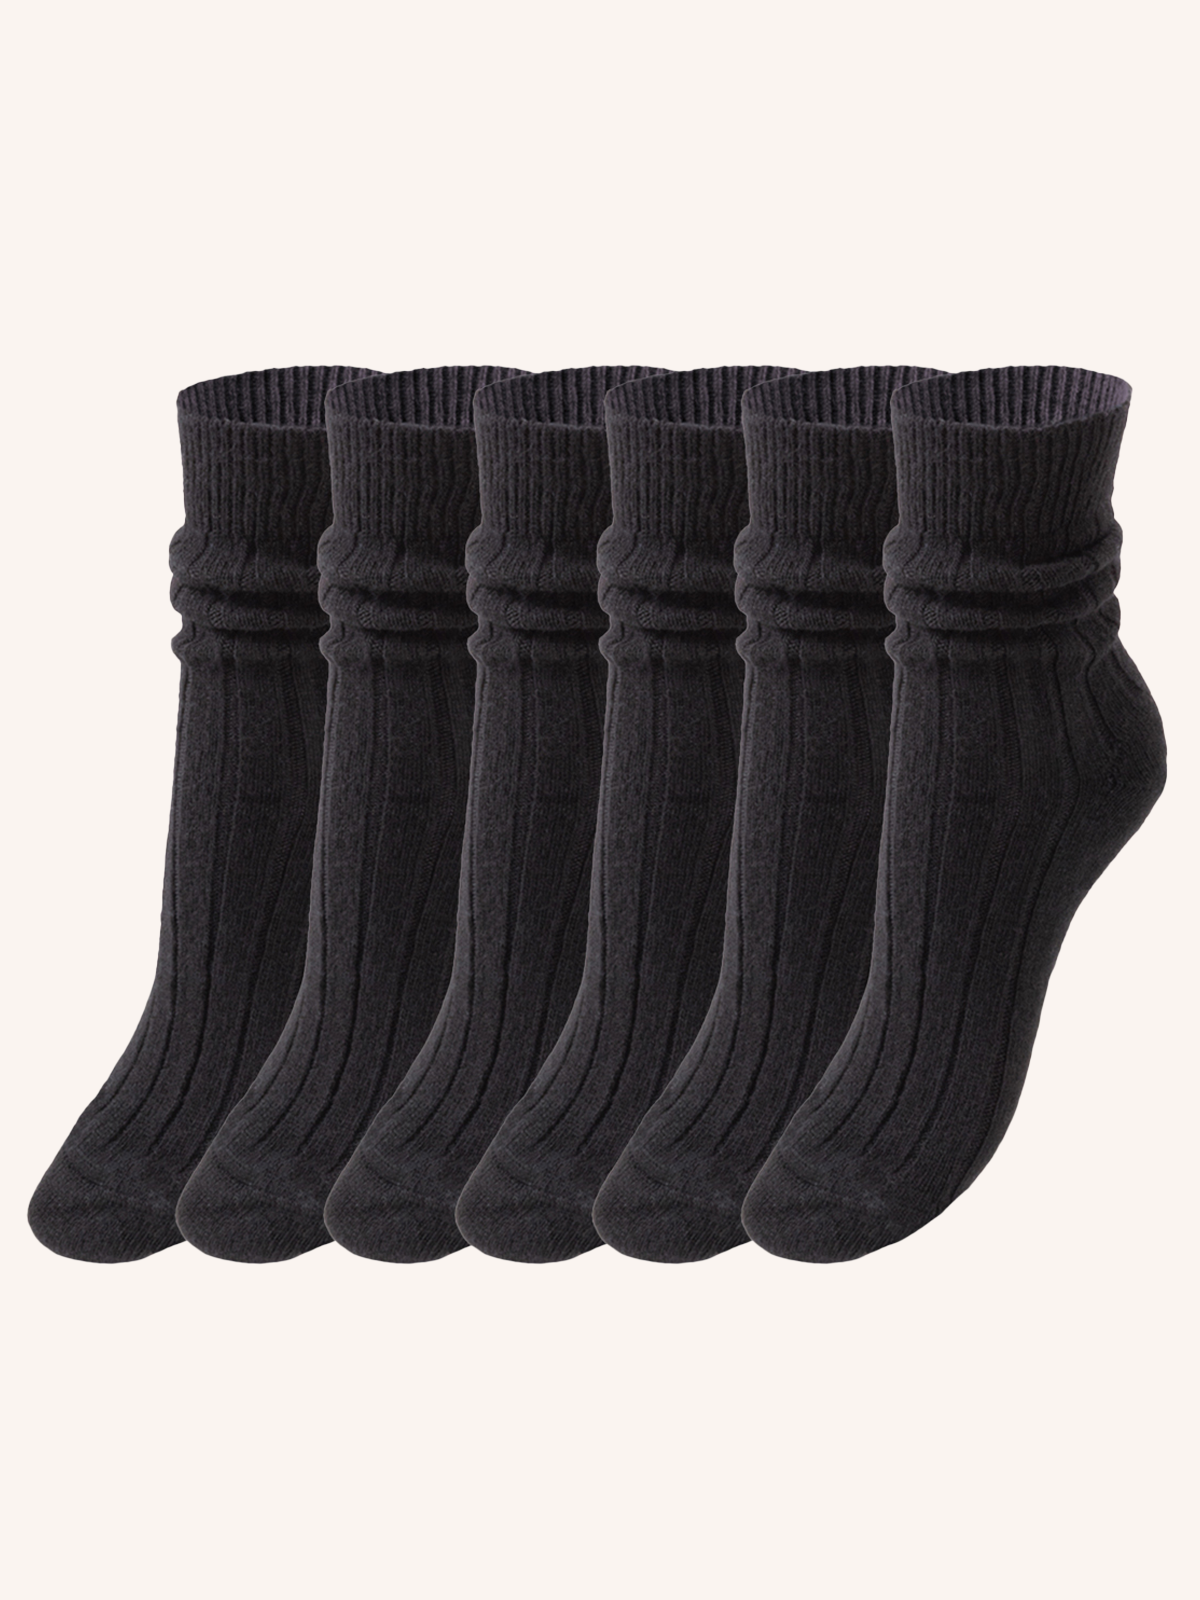 Short Wool Socks for Women | Plain Color | Pack of 6 pairs | Woolife DC